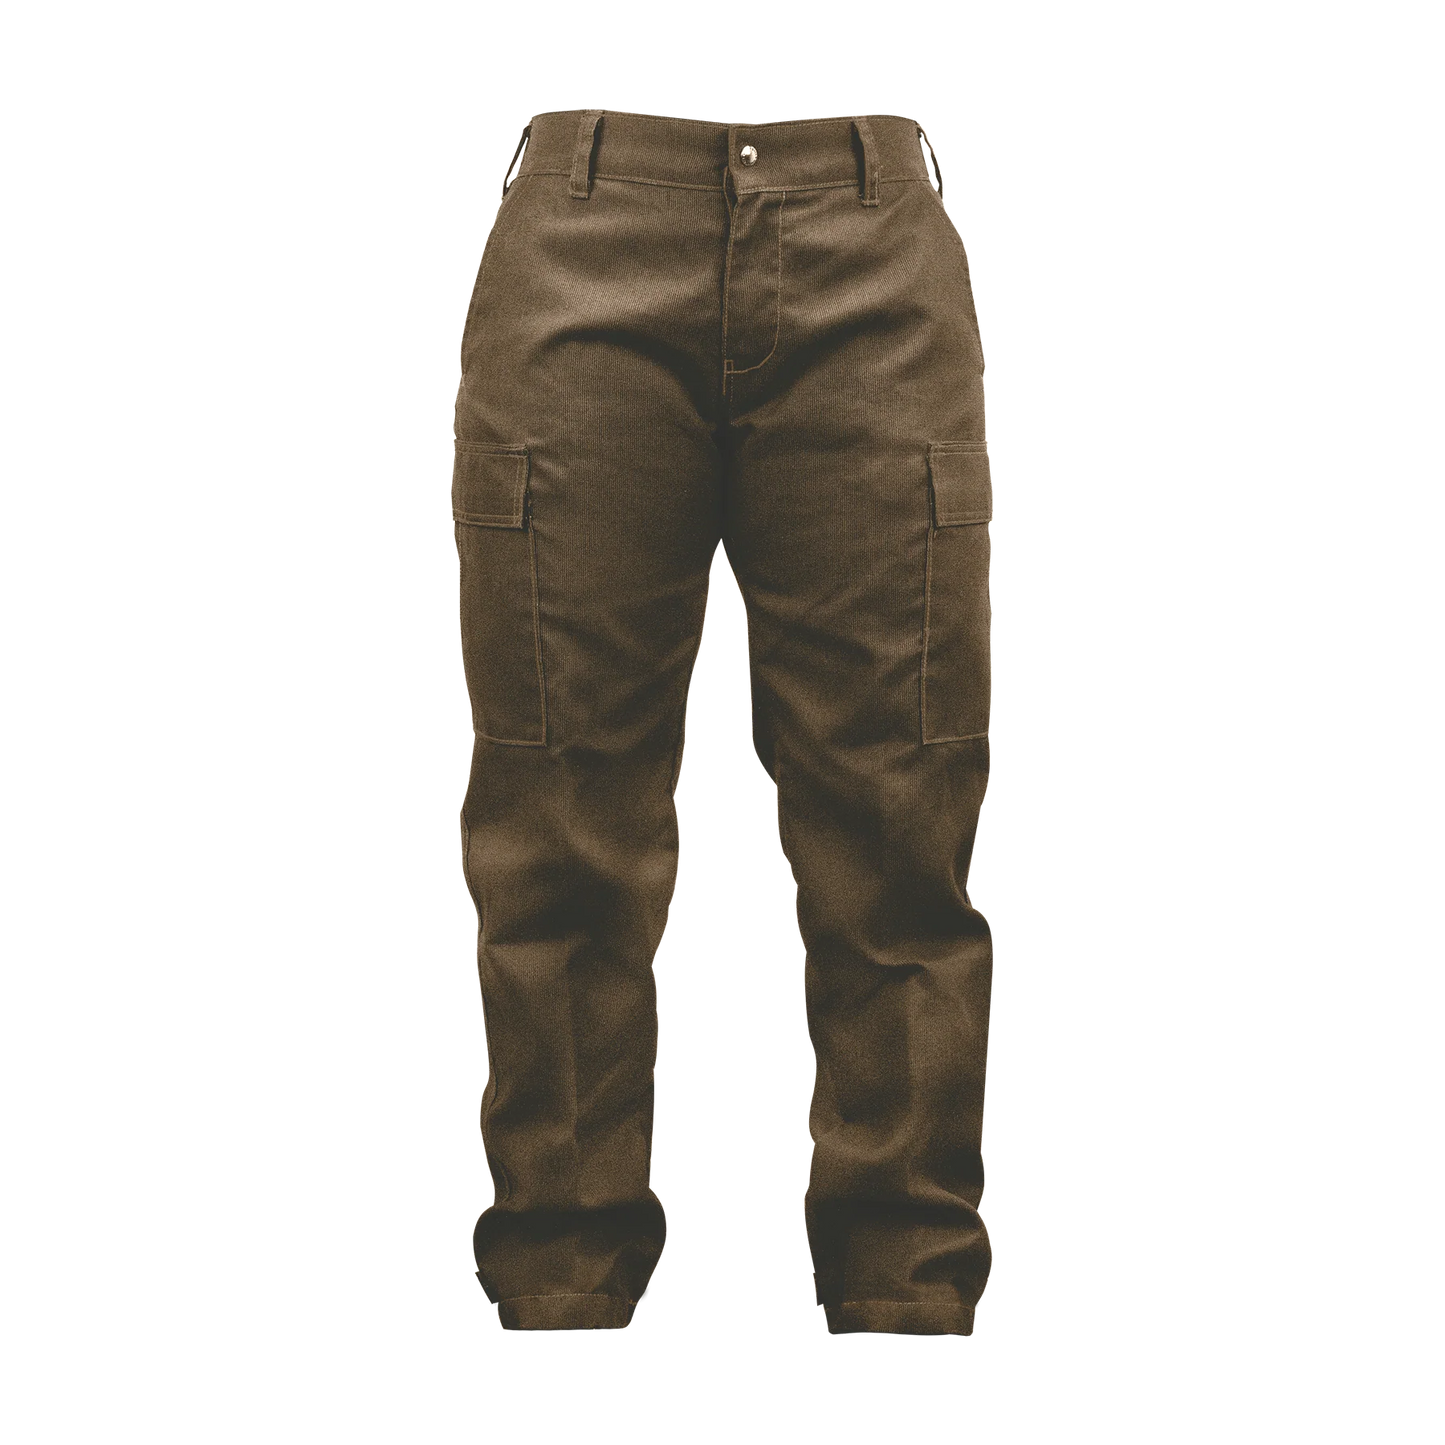 Women's Wildland Ember Brush Pant in NOMEX, ADVANCE, and PIONEER Material